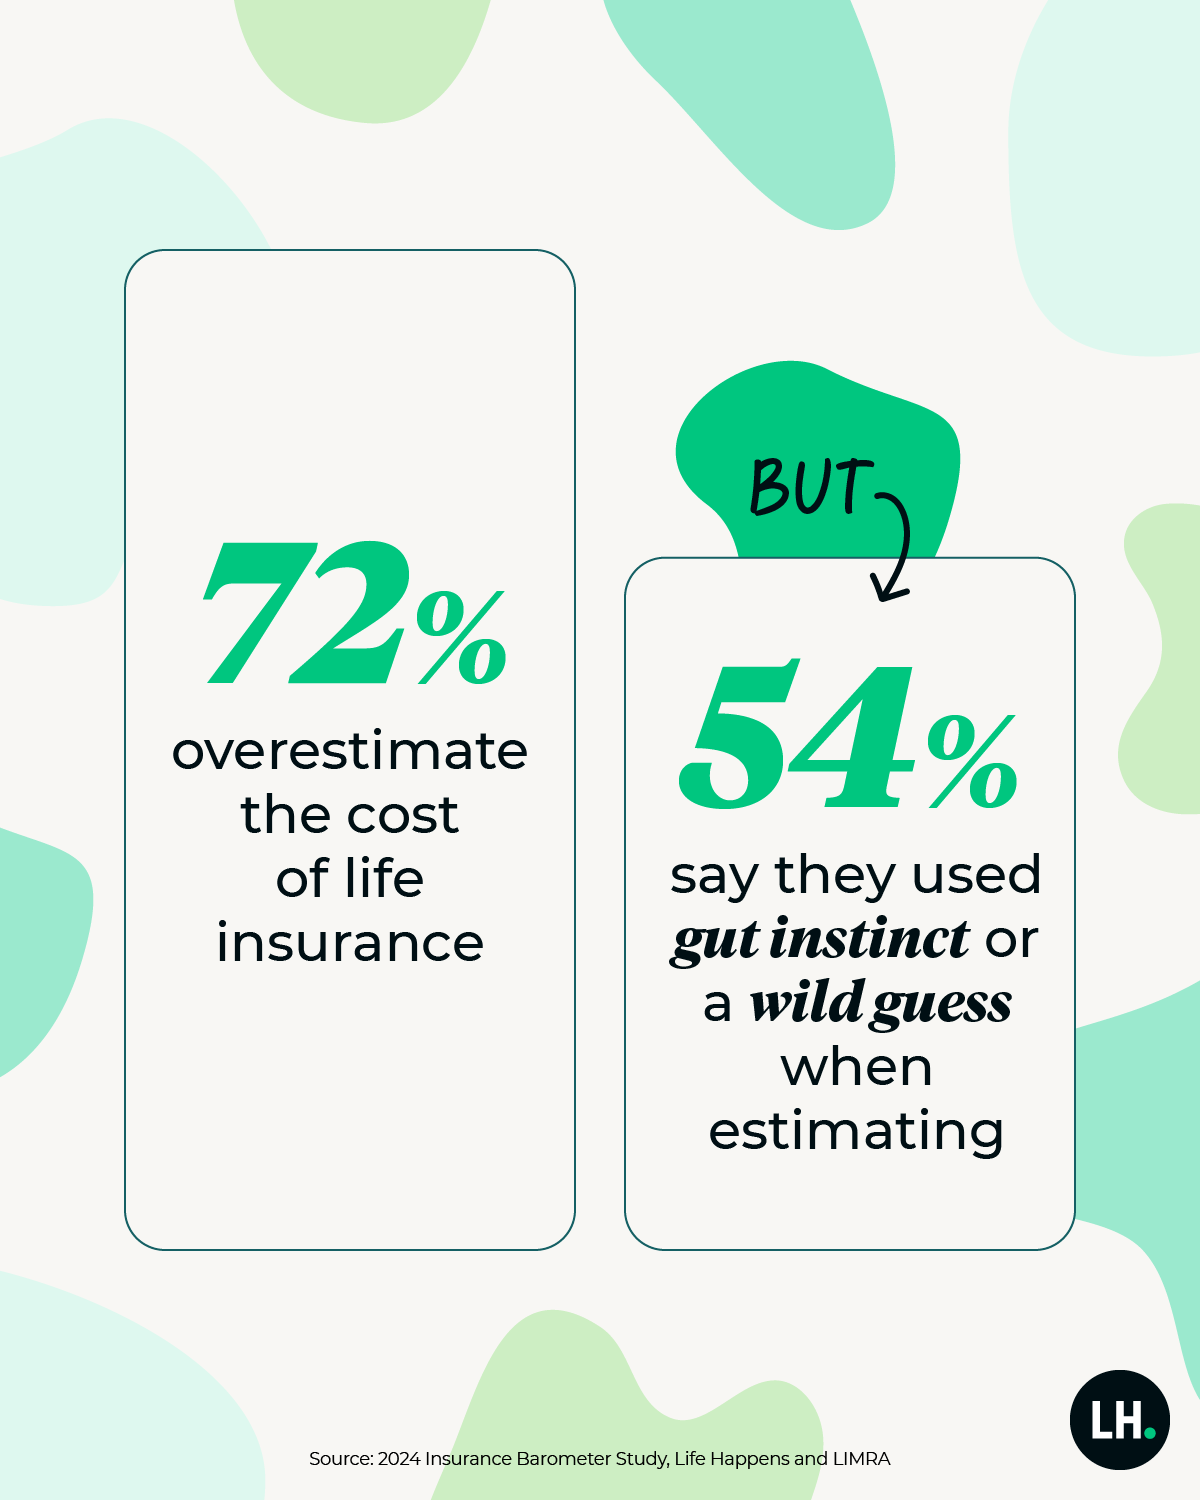 72% overestimate the cost of life insurance, but 54% say they used “gut instinct” or a “wild guess” when estimating.